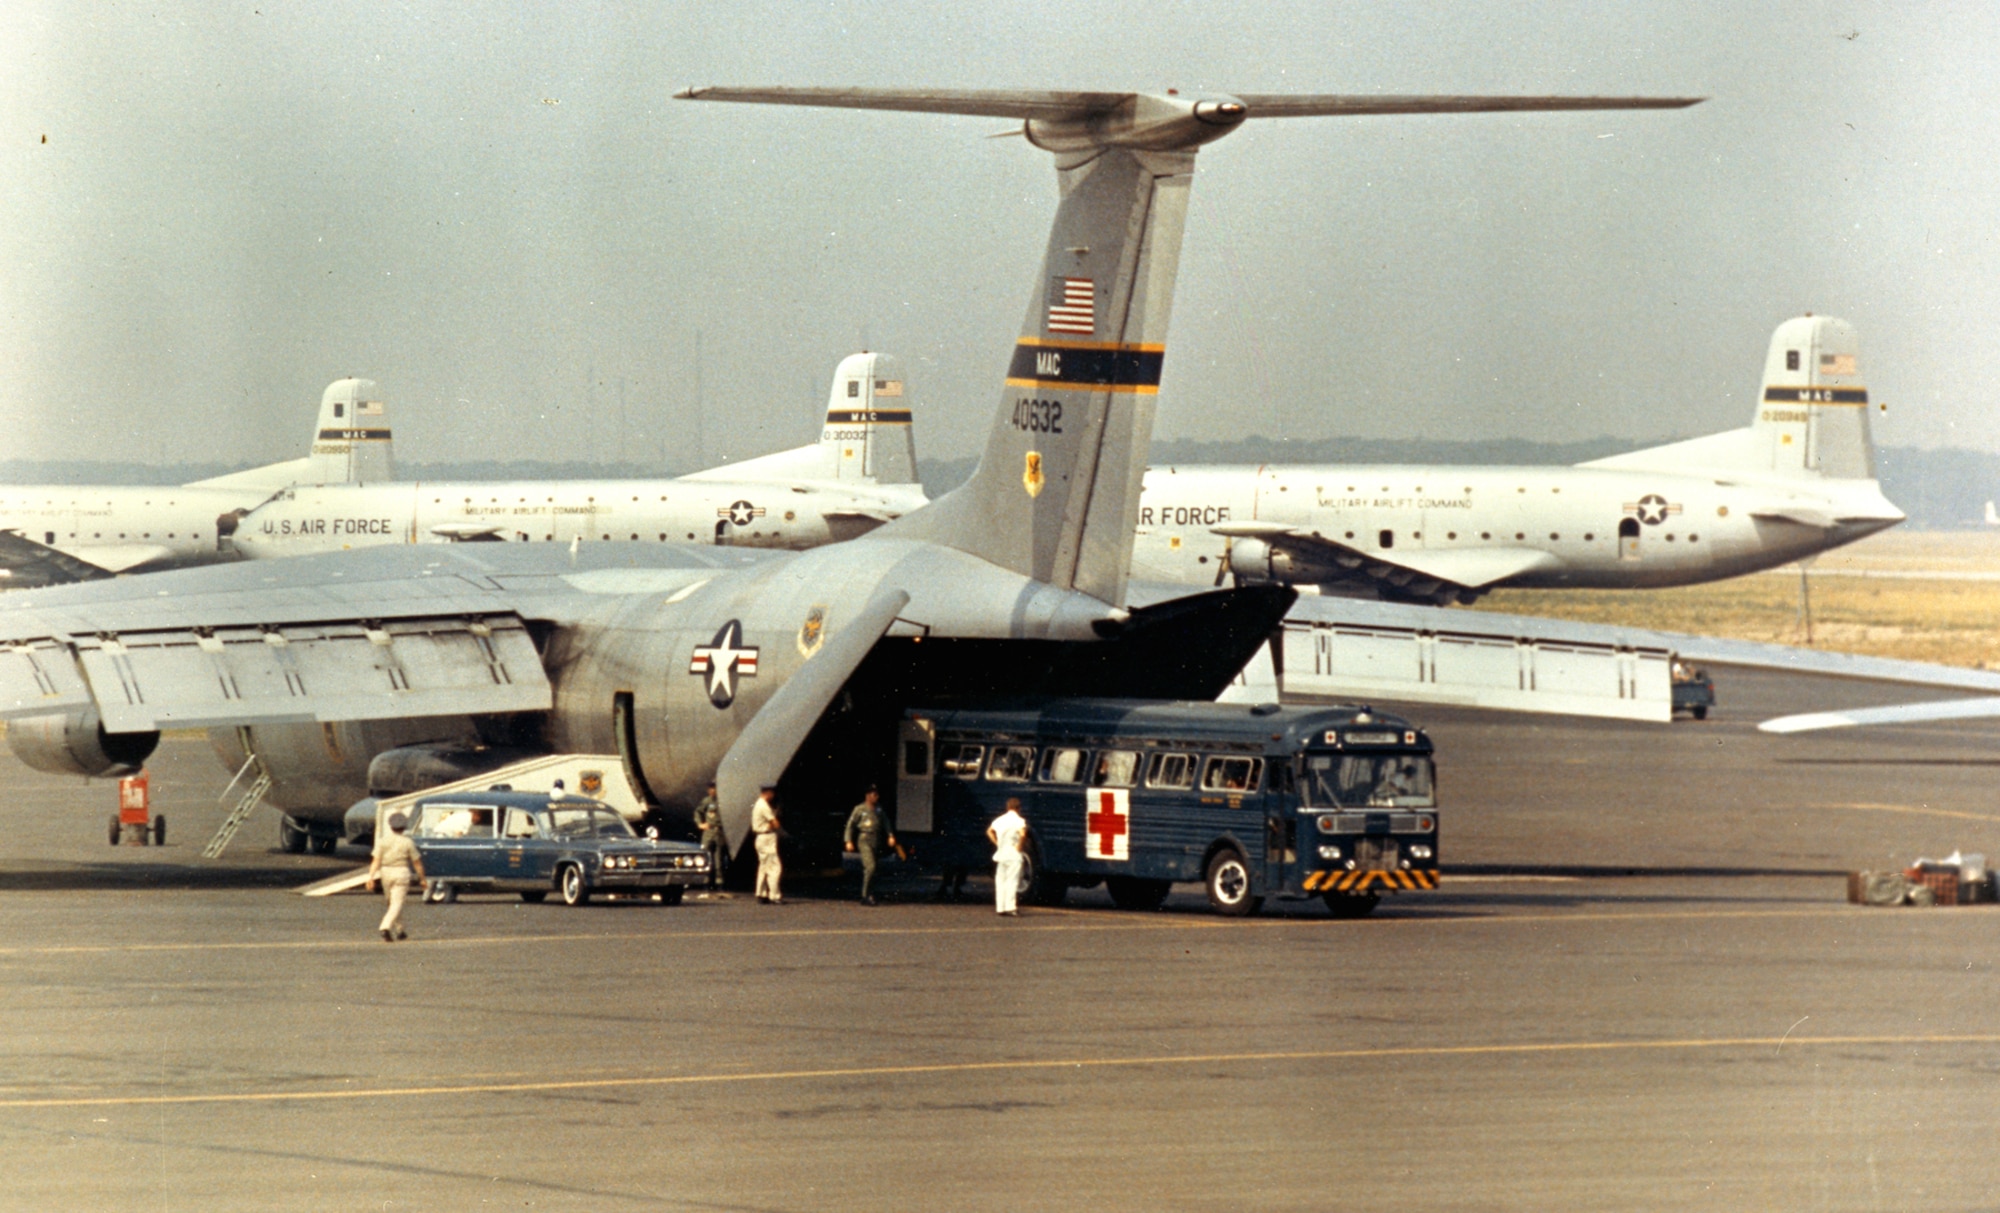 U.S. Air Force heavy transports brought supplies and troops to Southeast Asia, and also returned wounded to the U.S. (U.S. Air Force photo).